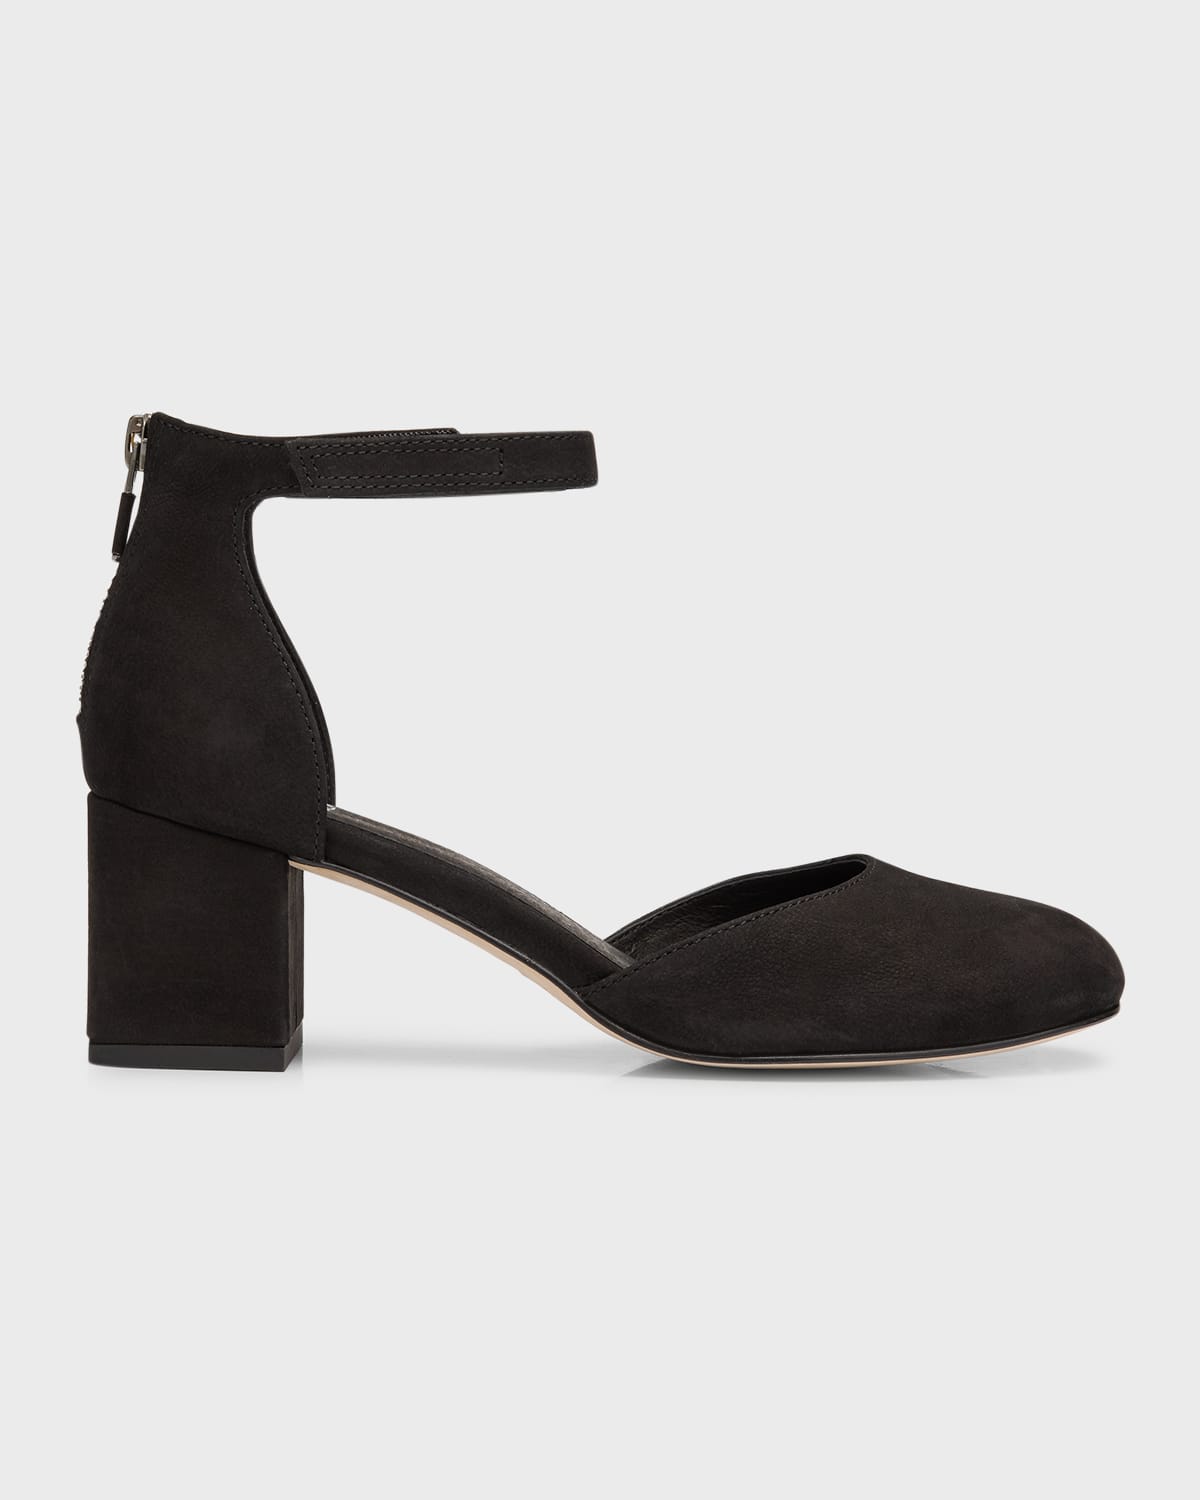 Indi Suede Ankle-Grip Pumps